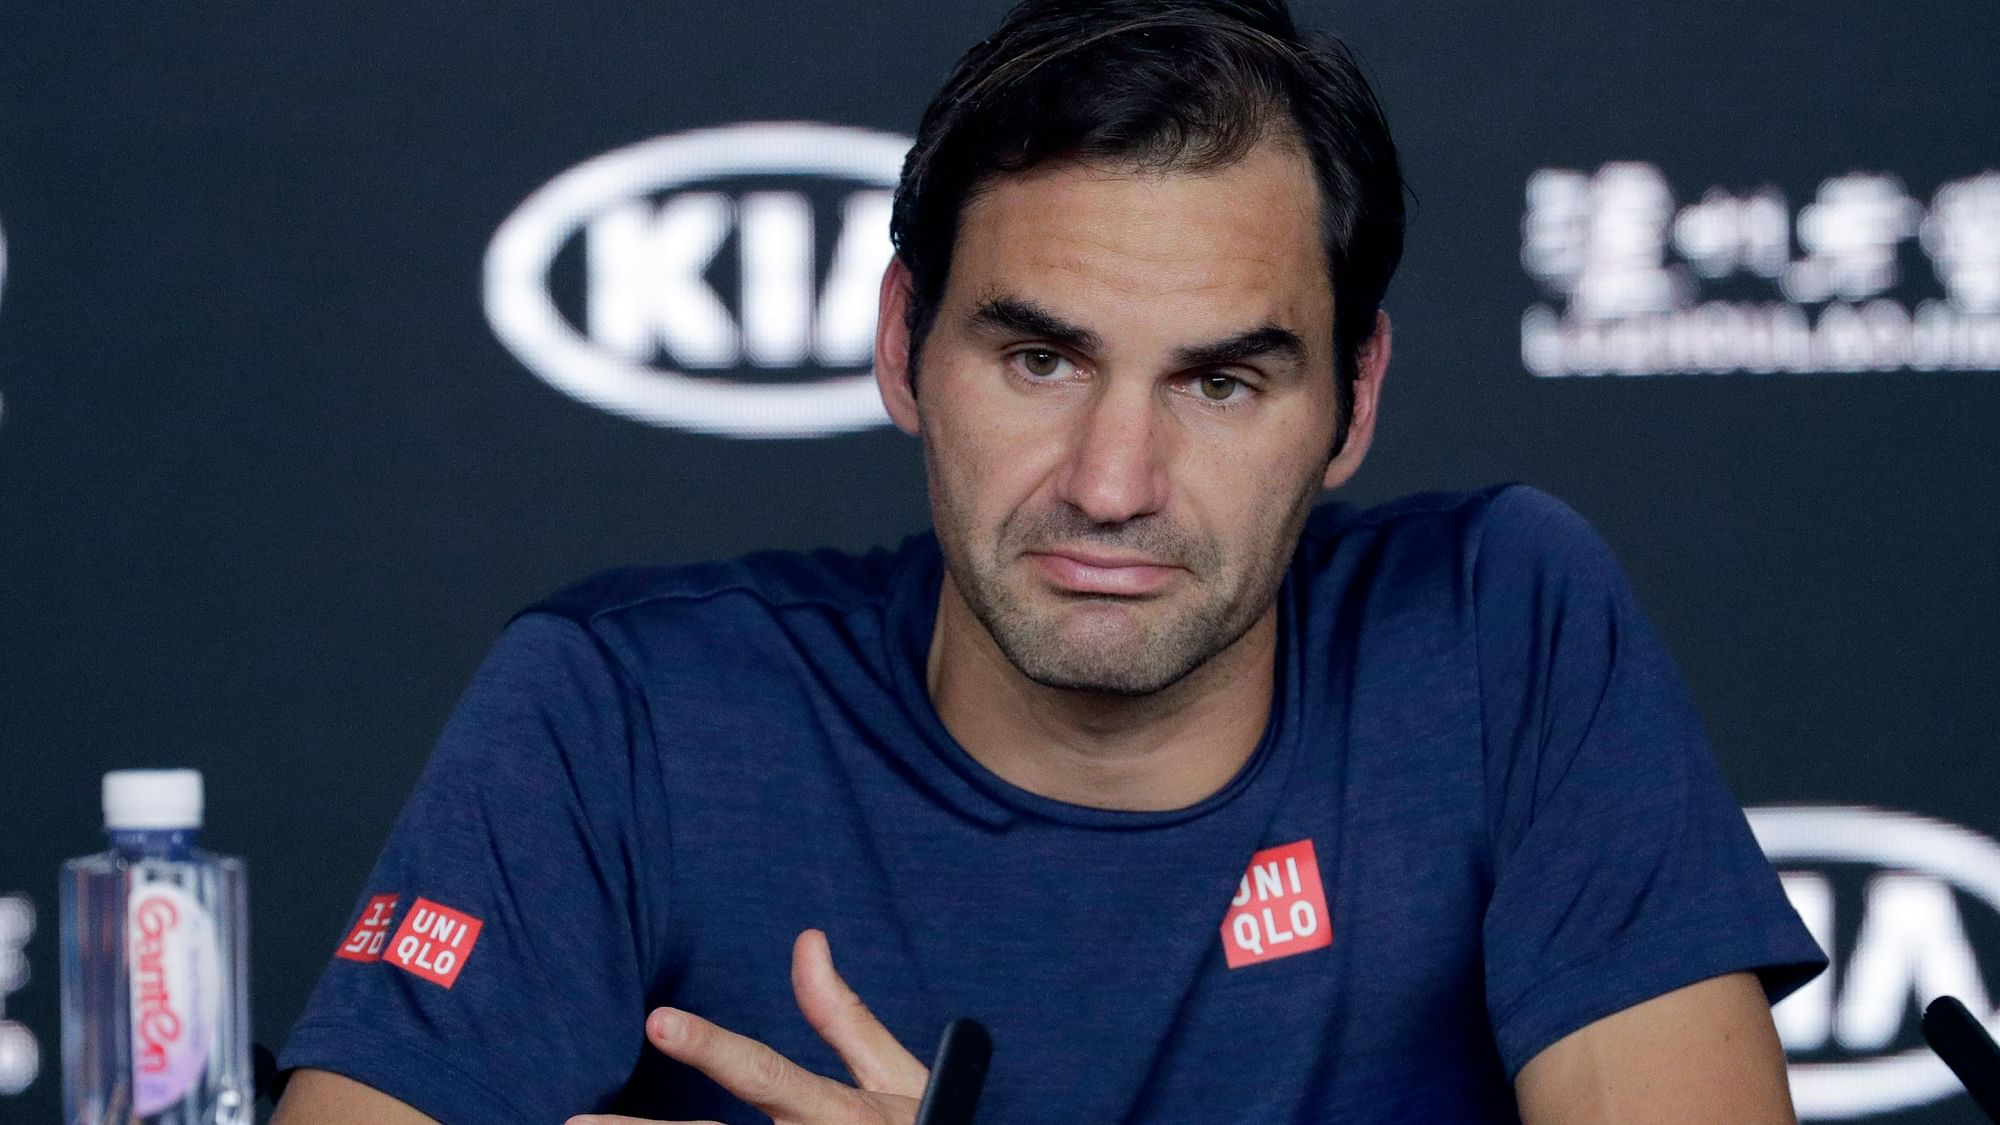 Roger Federer missed the French Open due to an injury in 2016, and has remained out of action on clay courts since 2017.